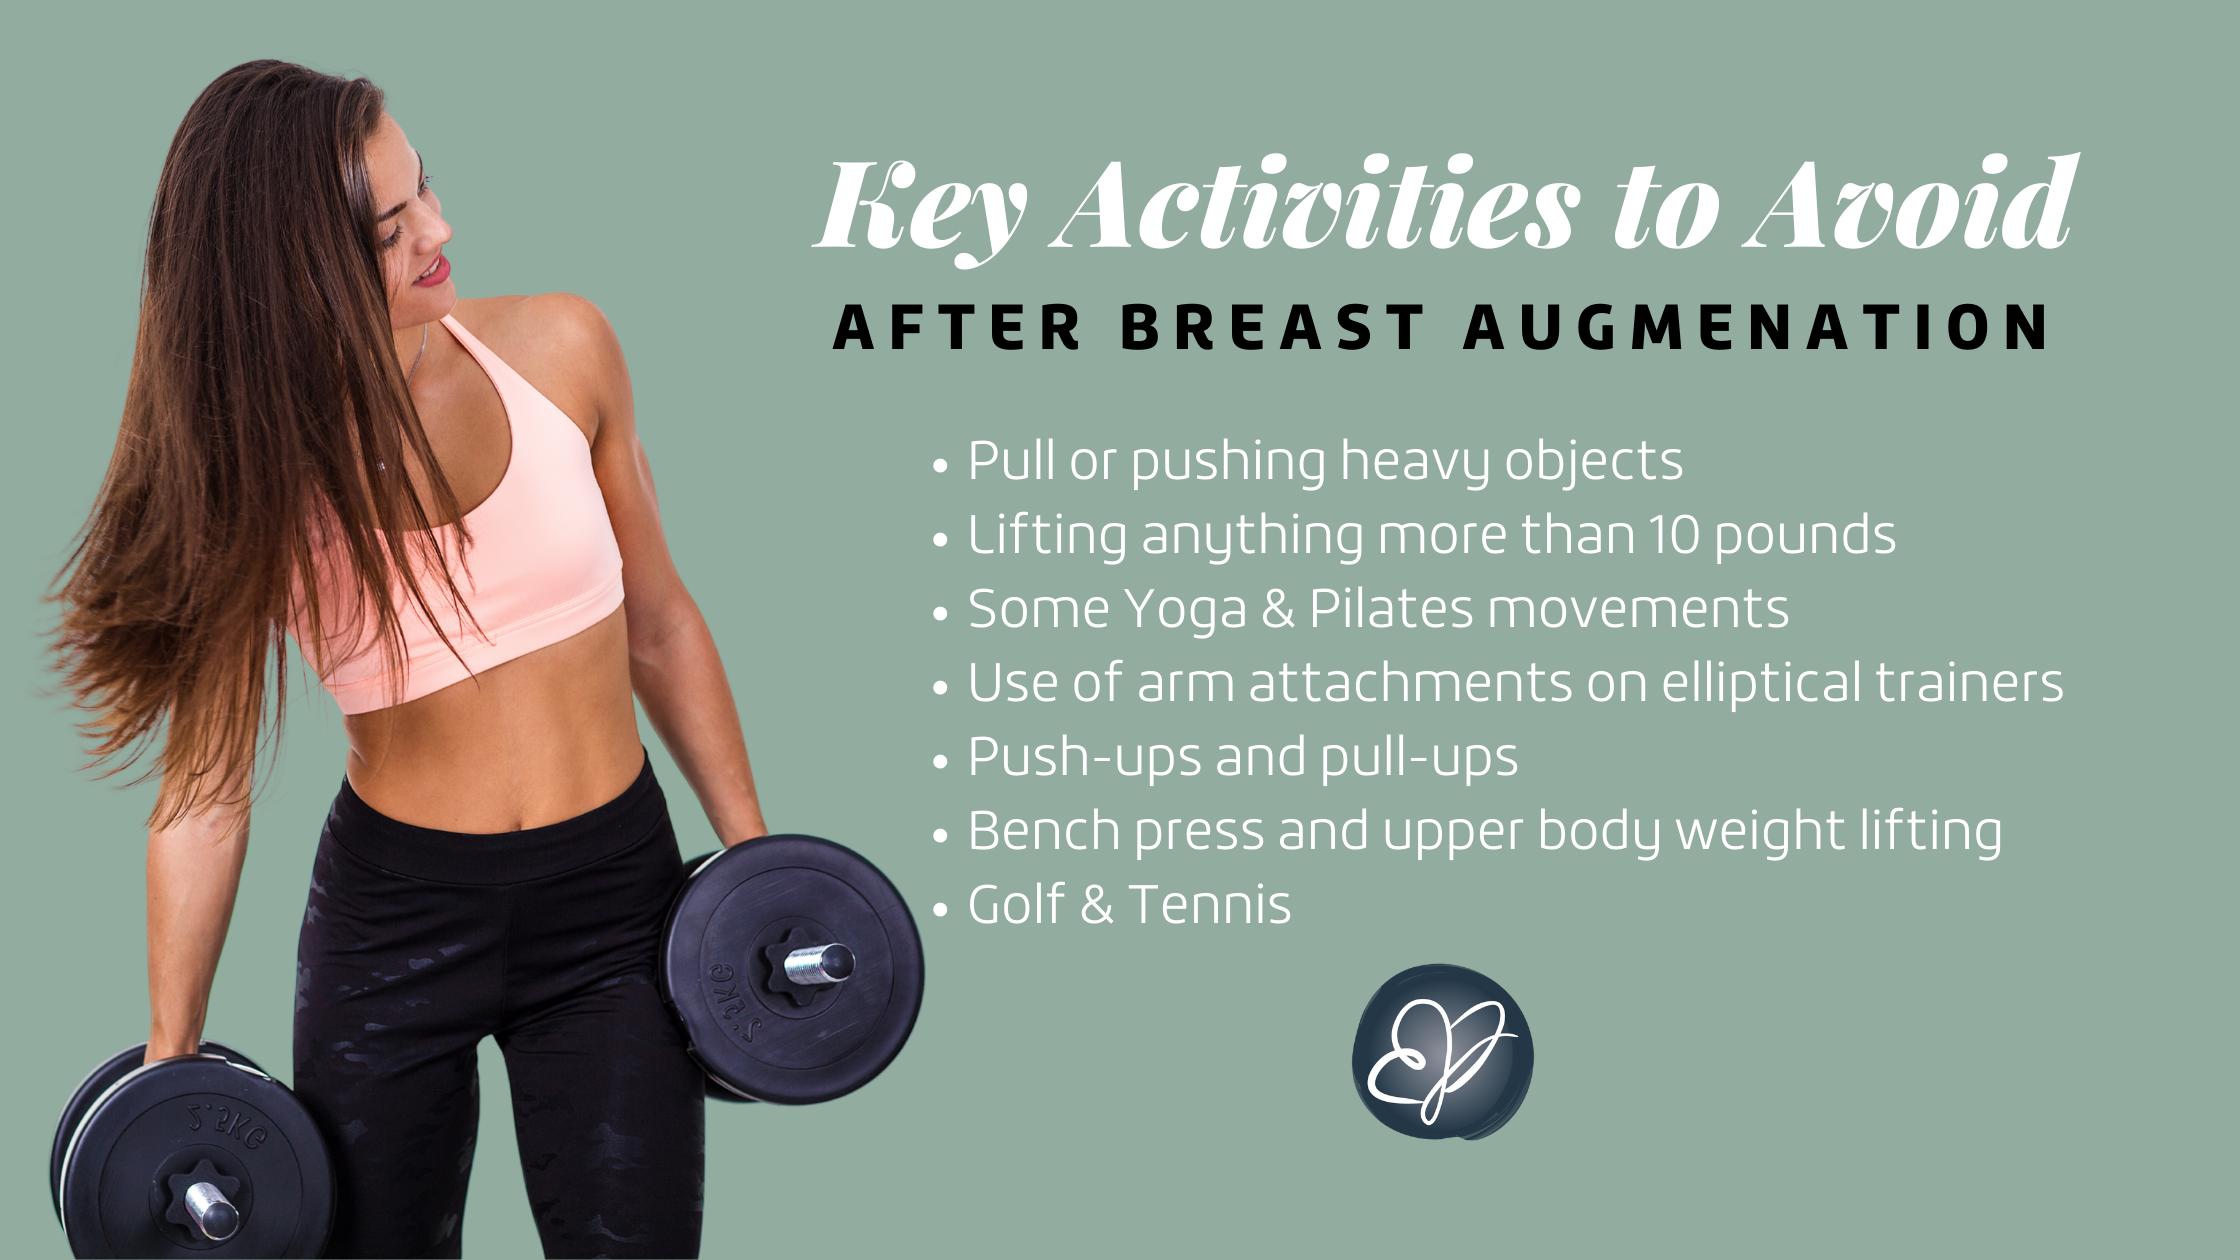 Back to active: Returning to exercise after breast augmentation